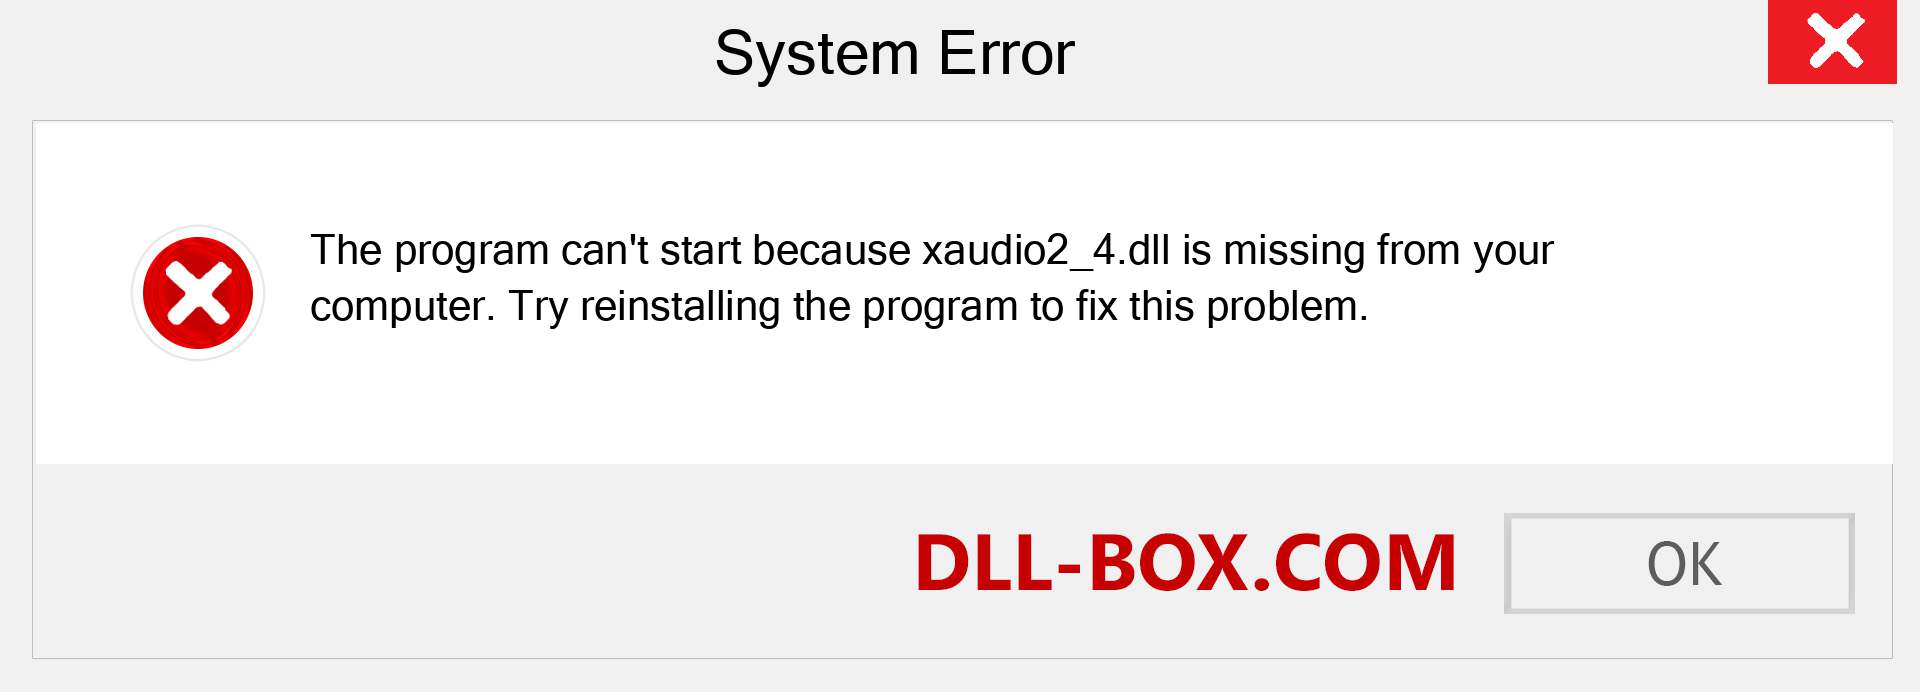  xaudio2_4.dll file is missing?. Download for Windows 7, 8, 10 - Fix  xaudio2_4 dll Missing Error on Windows, photos, images